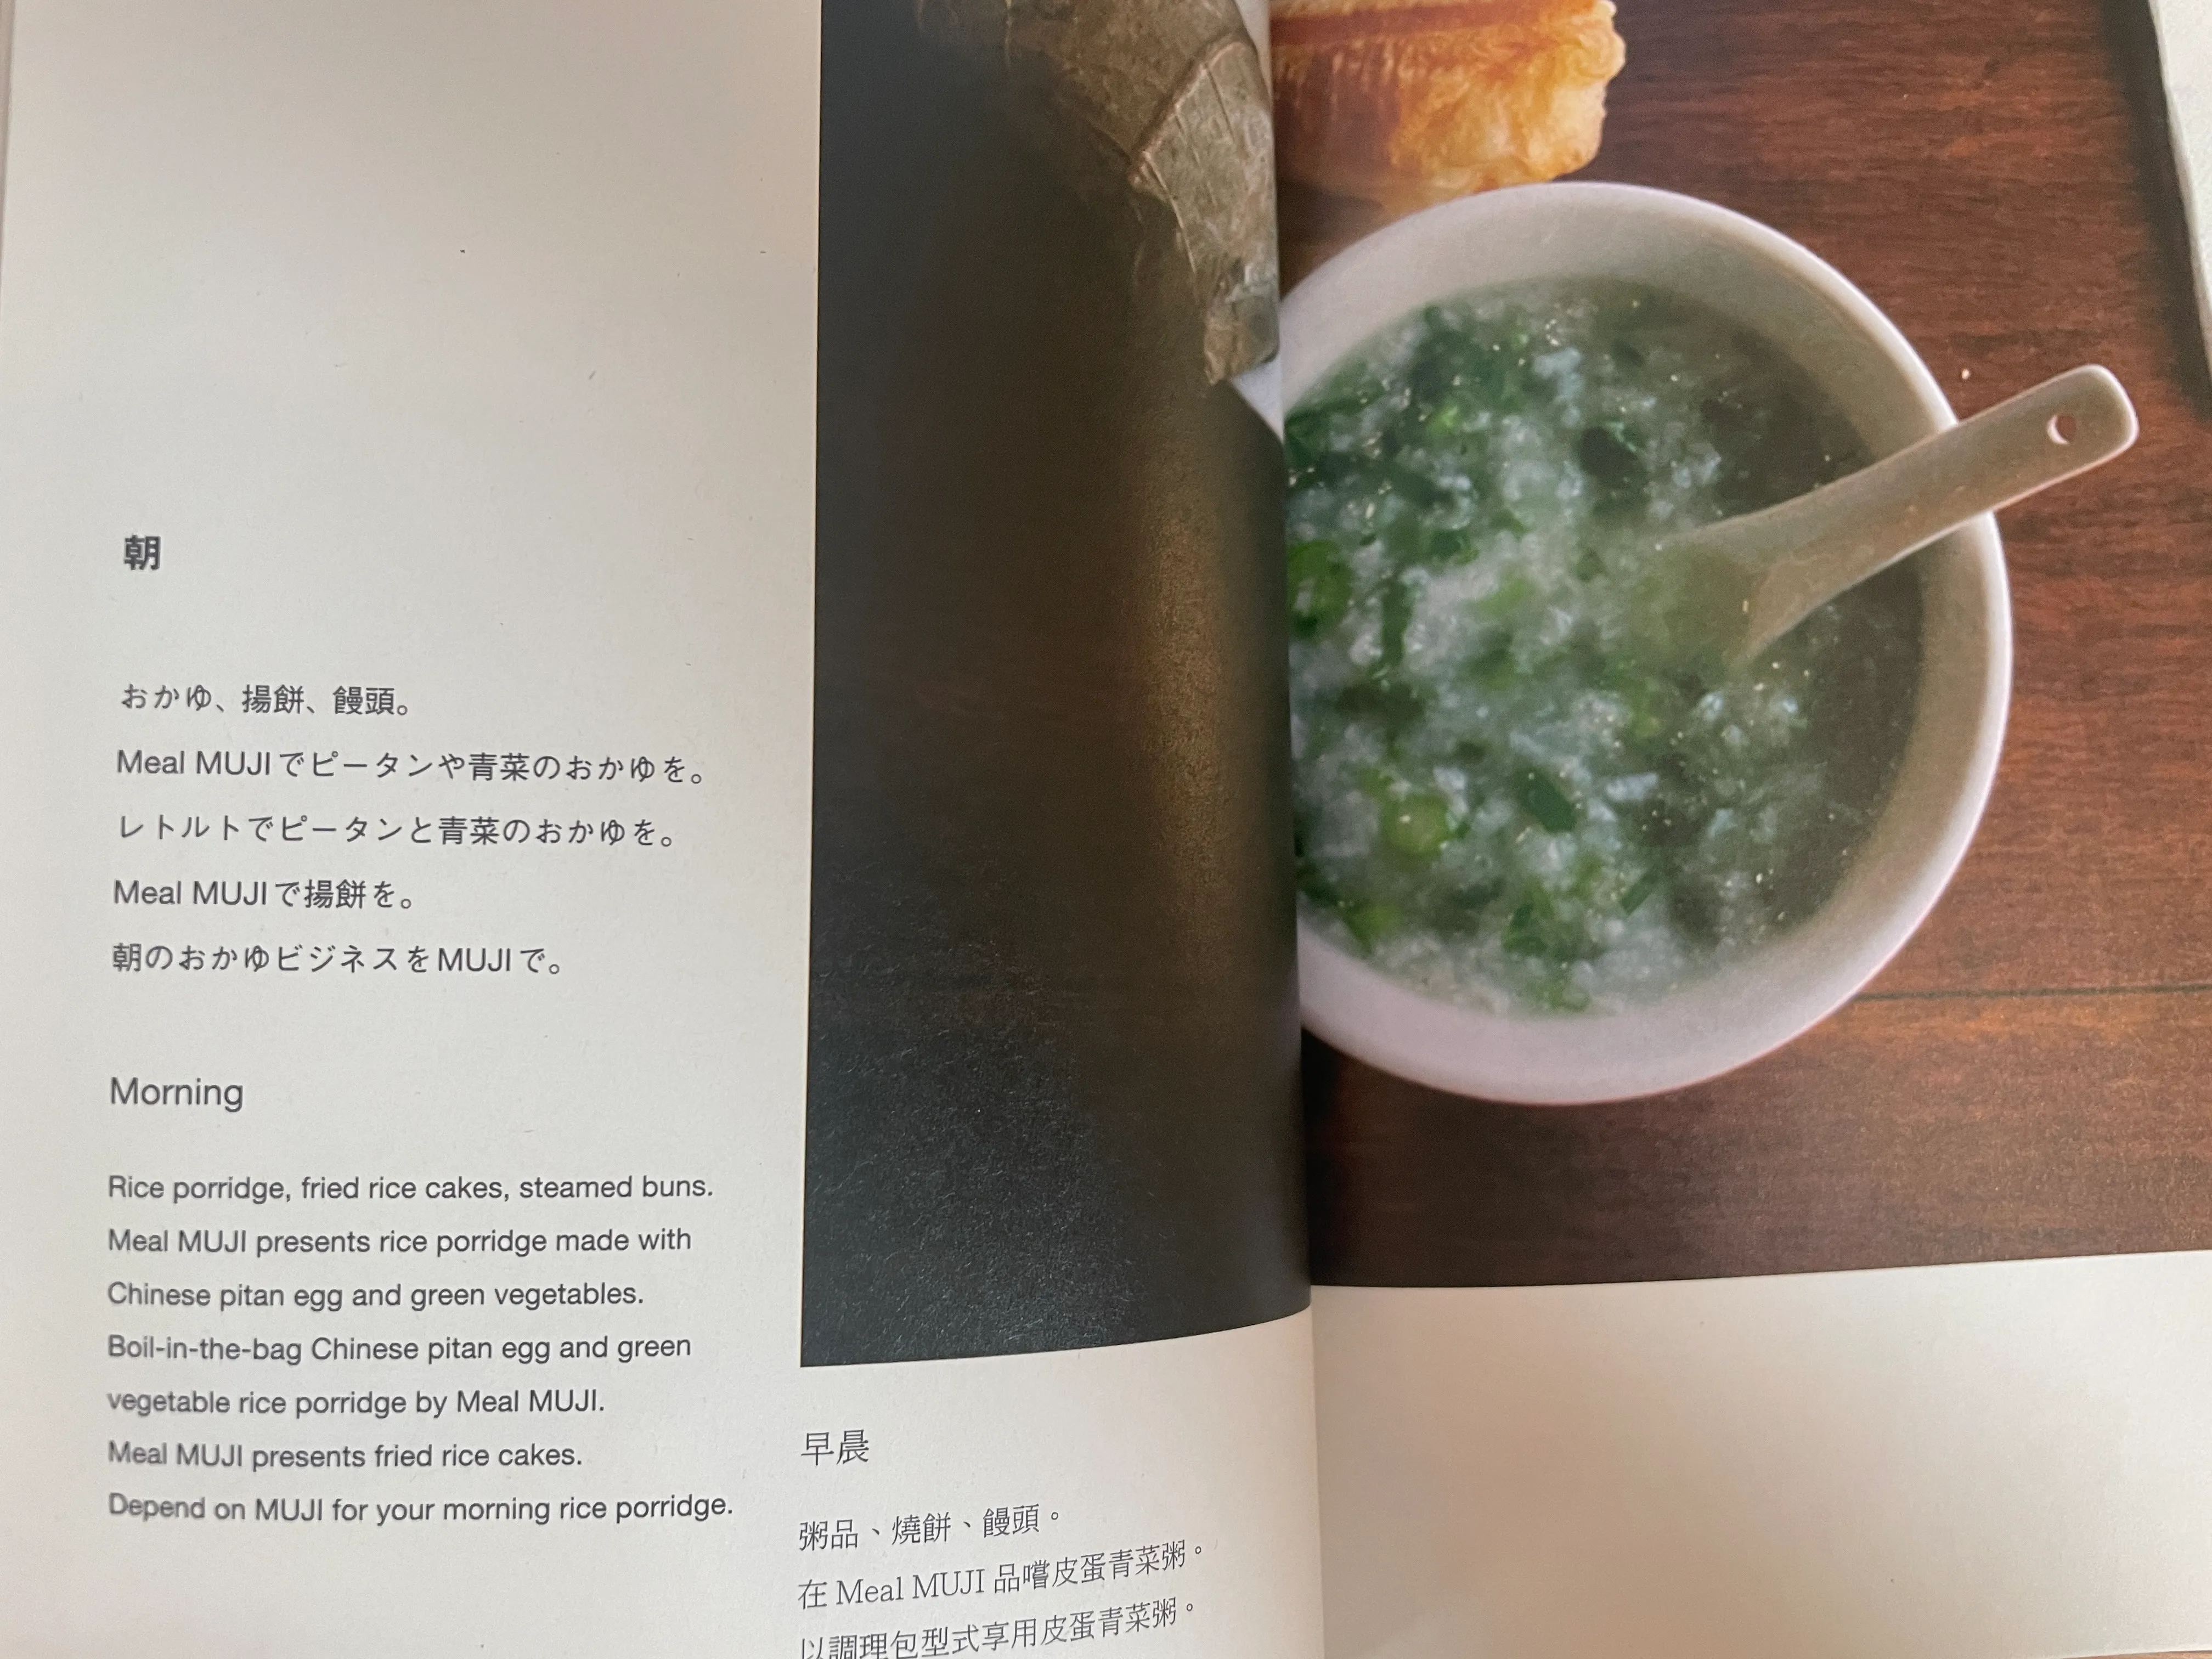 A photograph of favorite moment from Found Muji. Rice porridge morning ritual.